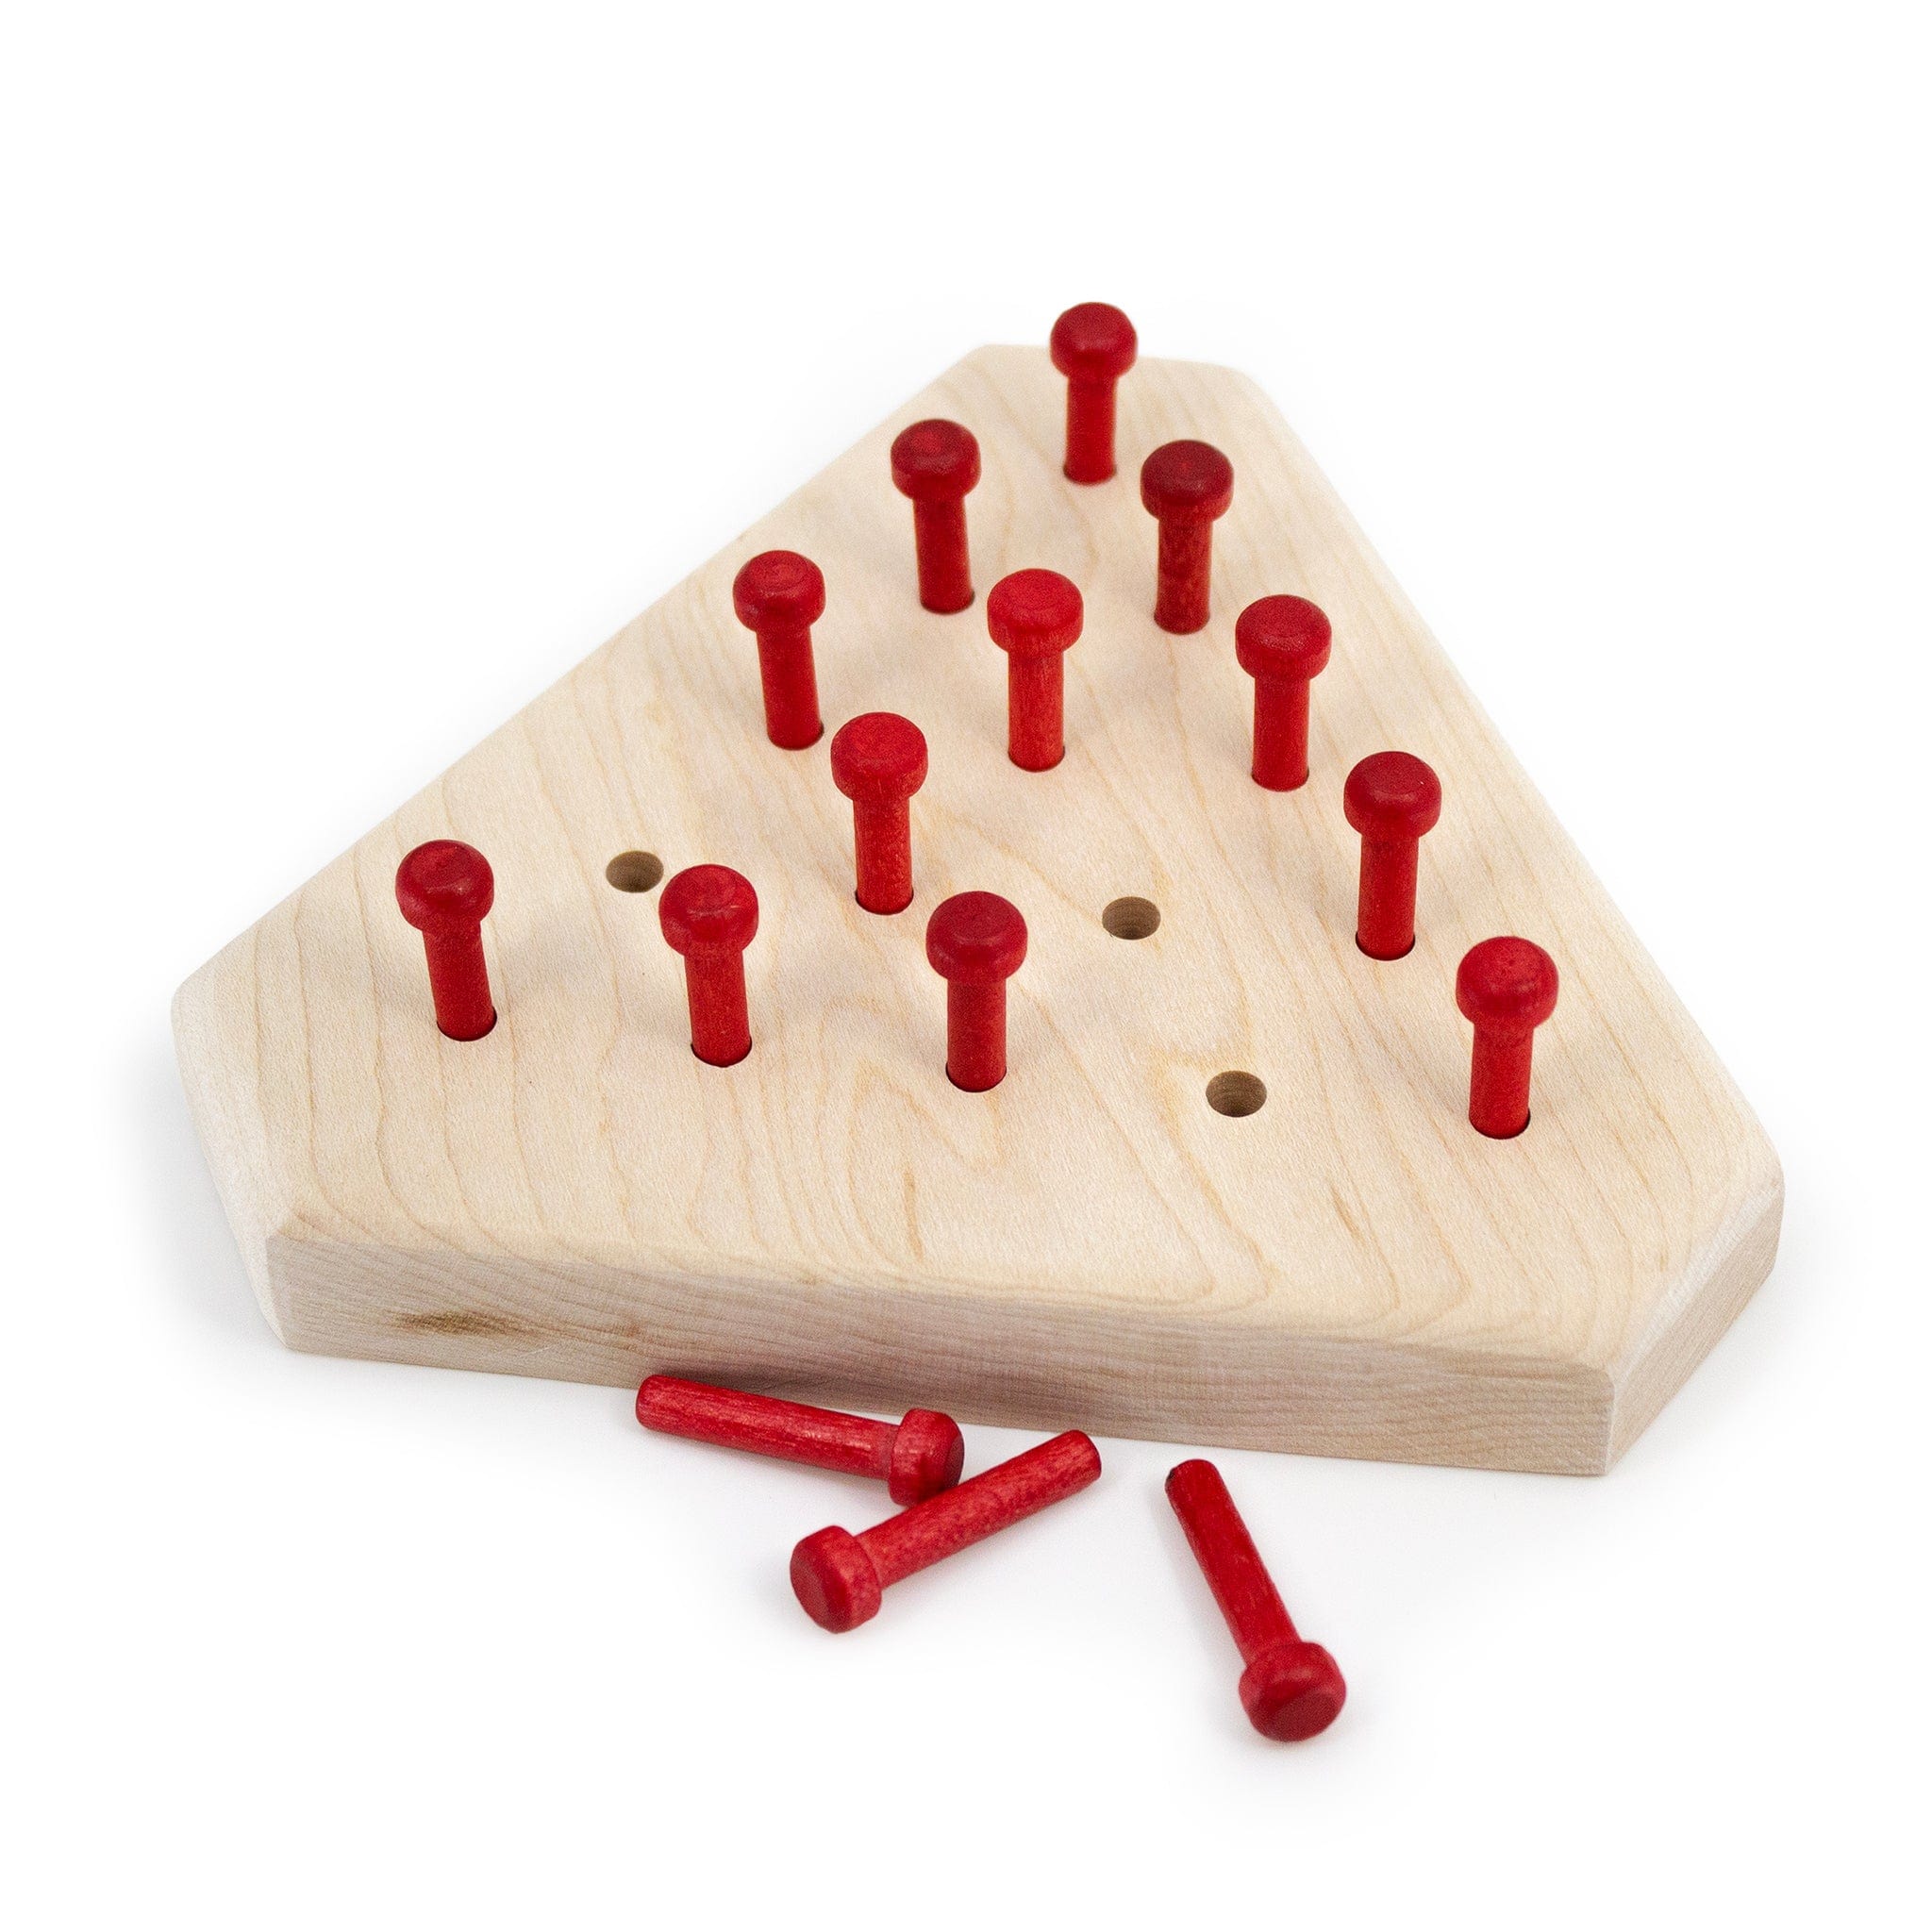 Classic Peg Elimination Game Elimination game | wooden games | peg game | wooden solitaire | cracker | Maker of Lunenburg | Made in Canada